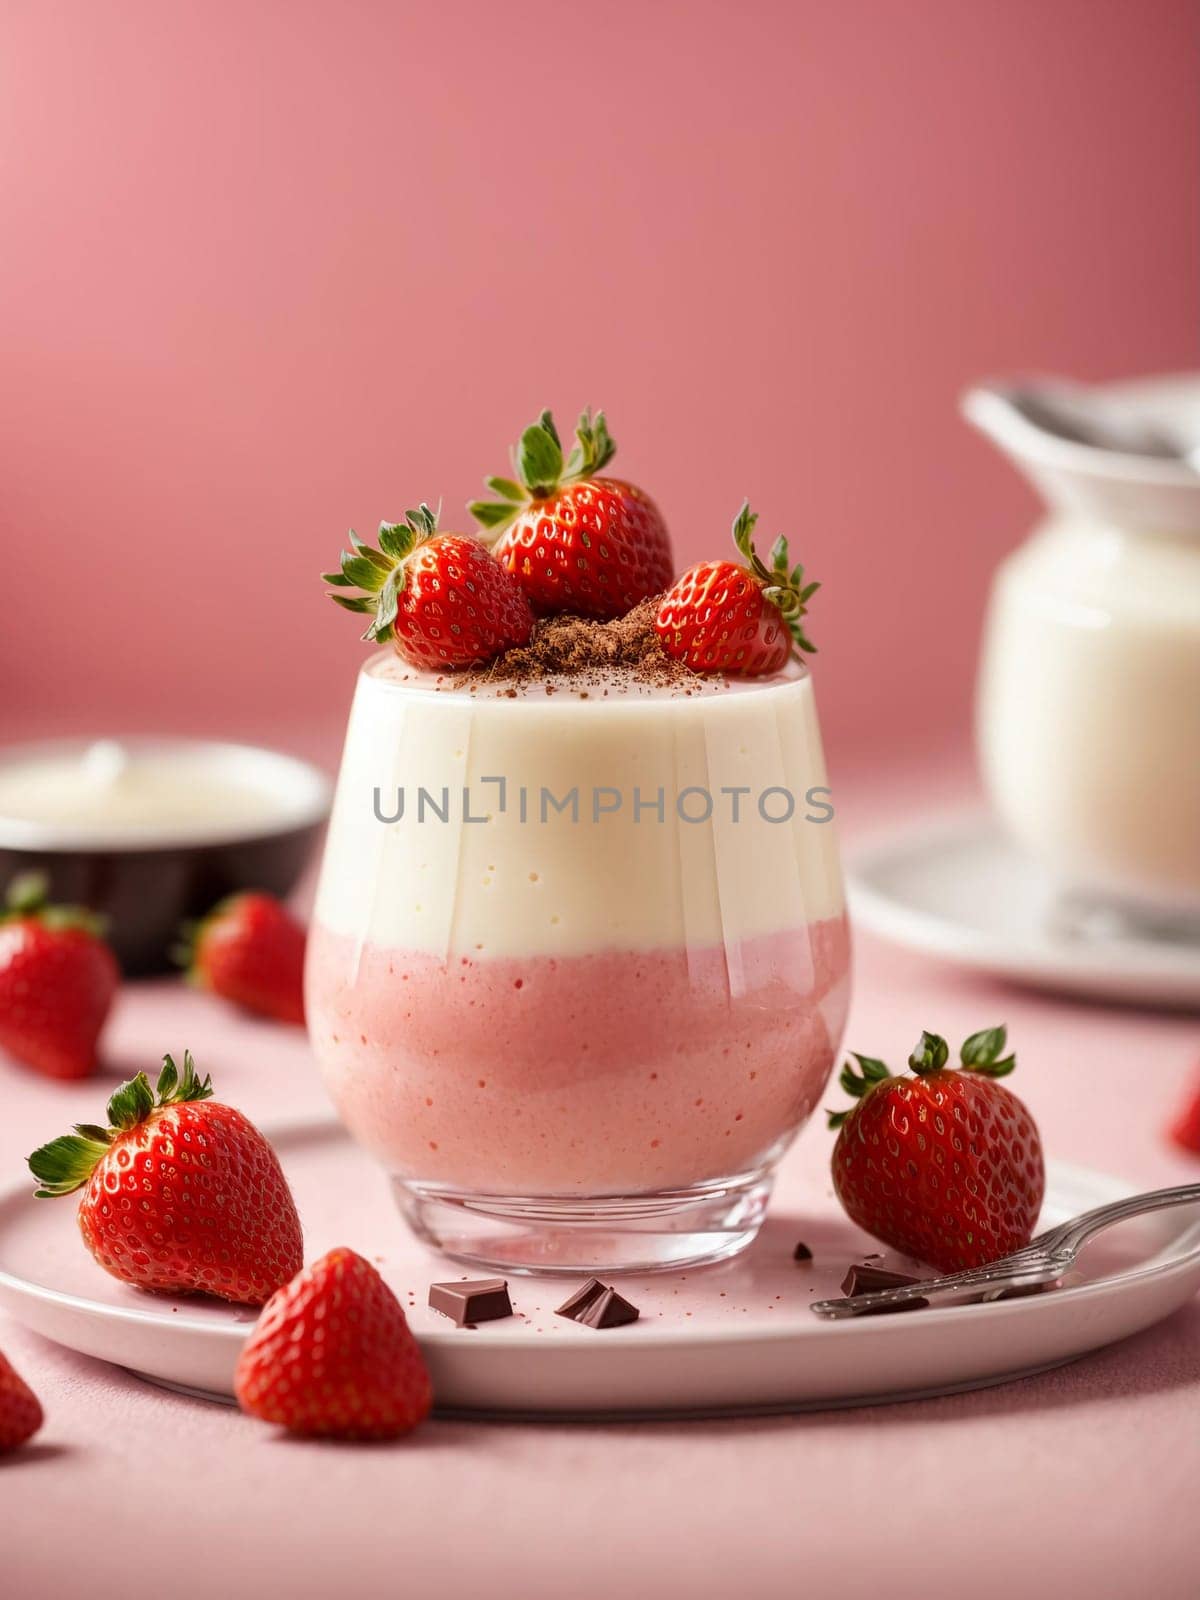 panna cotta with strawberries and strawberry sauce on a pastel pink background by Севостьянов